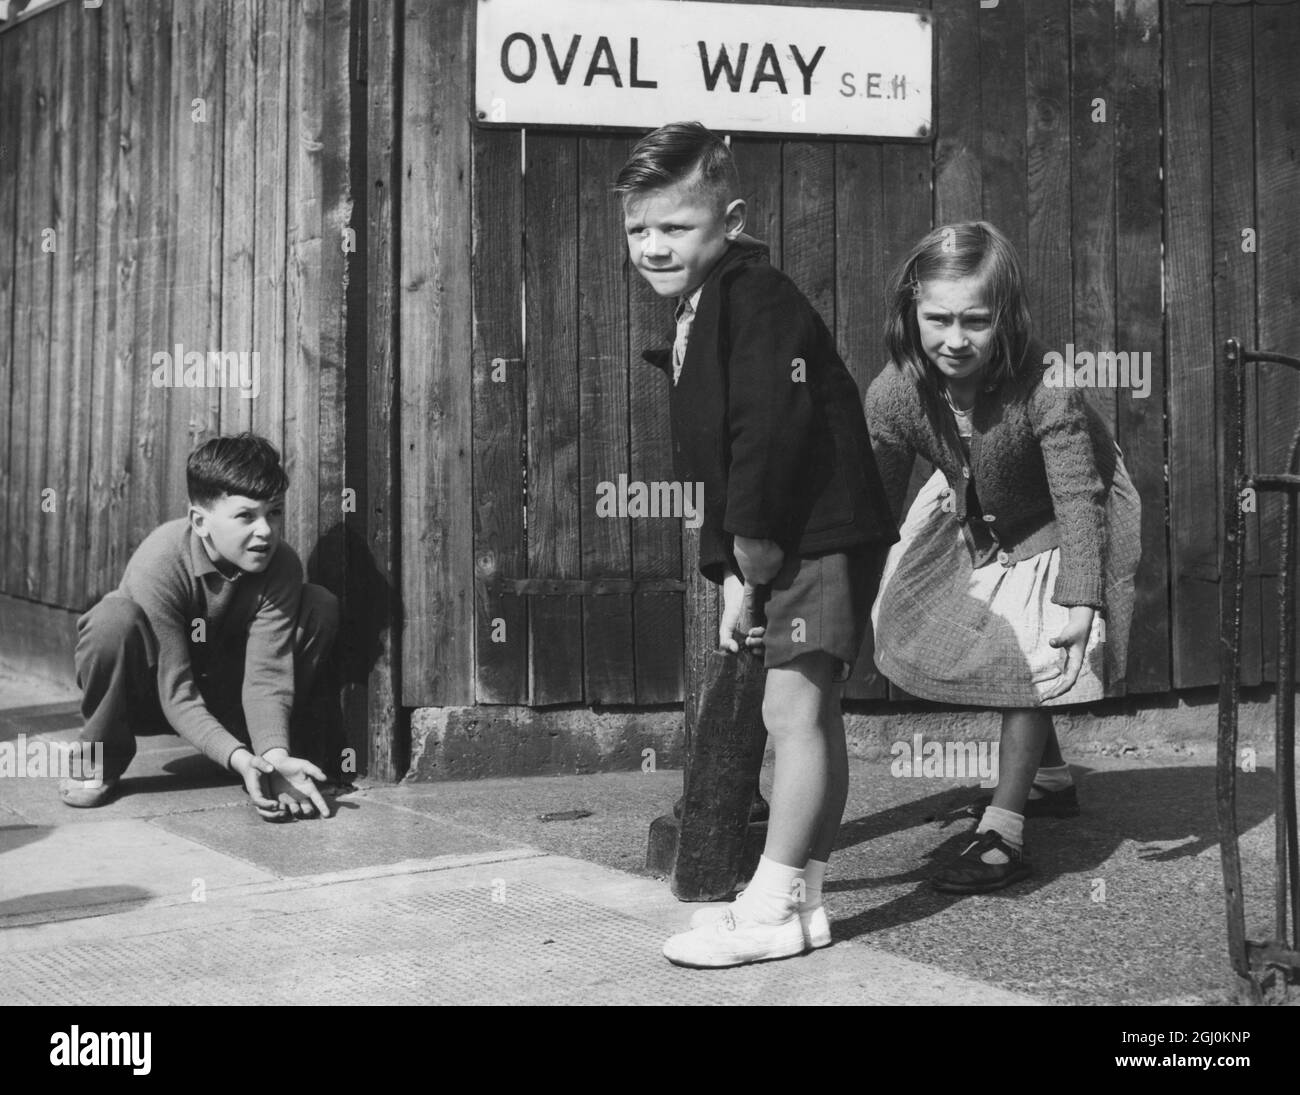 Children playing a game of cricket in the street - Oval Way is the road sign behind them - August 1957 ©TopFoto Stock Photo